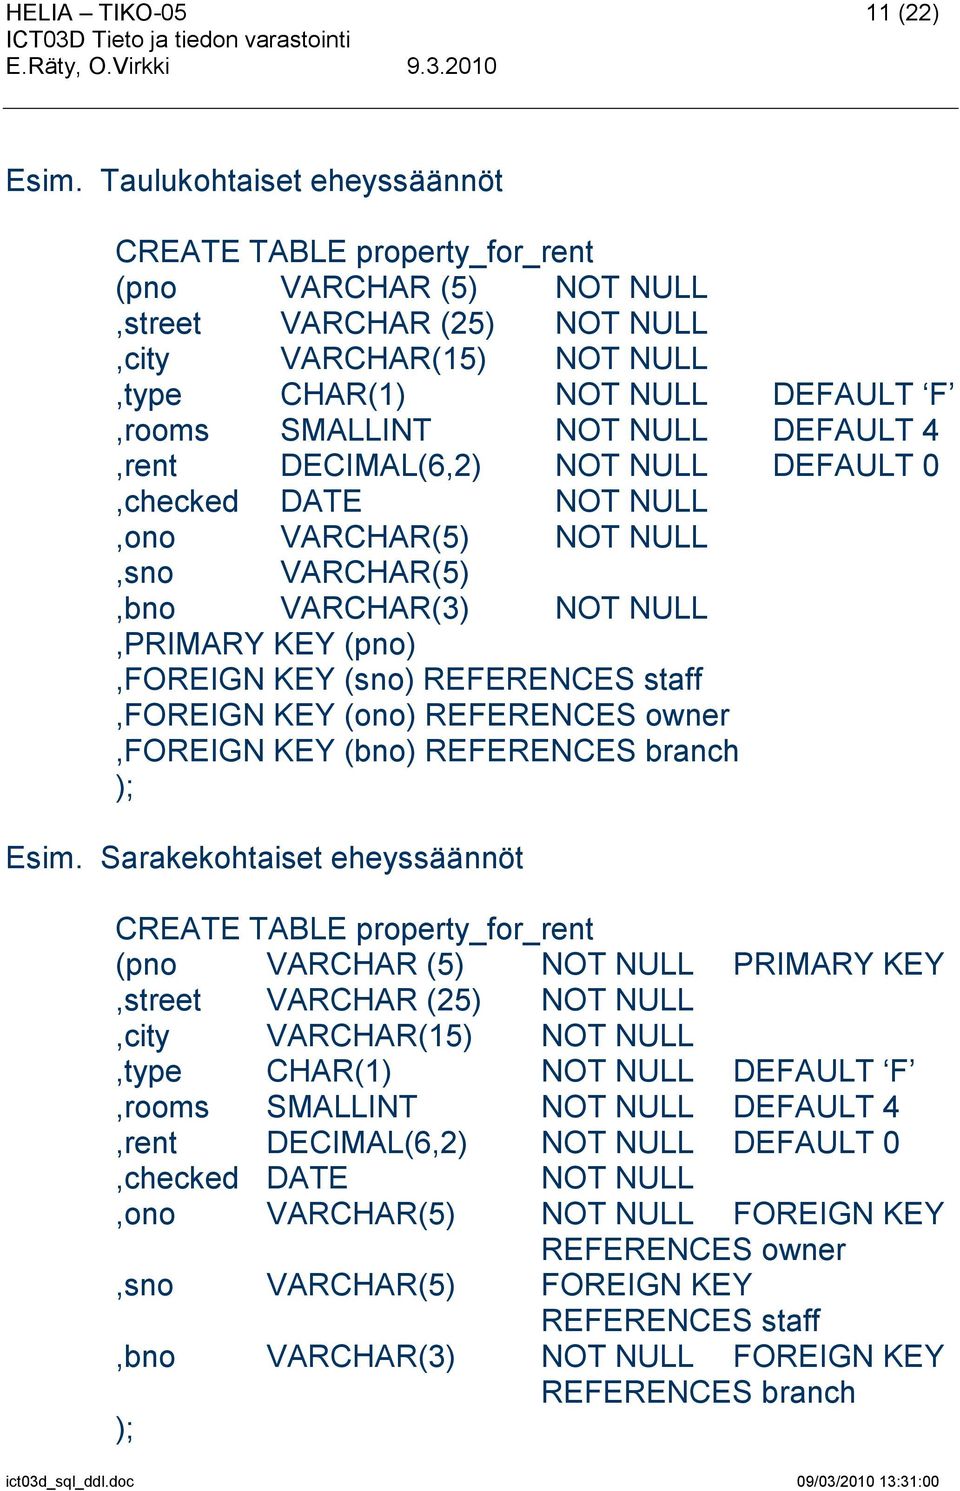 DEFAULT 4,rent DECIMAL(6,2) NOT NULL DEFAULT 0,checked DATE NOT NULL,ono VARCHAR(5) NOT NULL,sno VARCHAR(5),bno VARCHAR(3) NOT NULL,PRIMARY KEY (pno),foreign KEY (sno) REFERENCES staff,foreign KEY